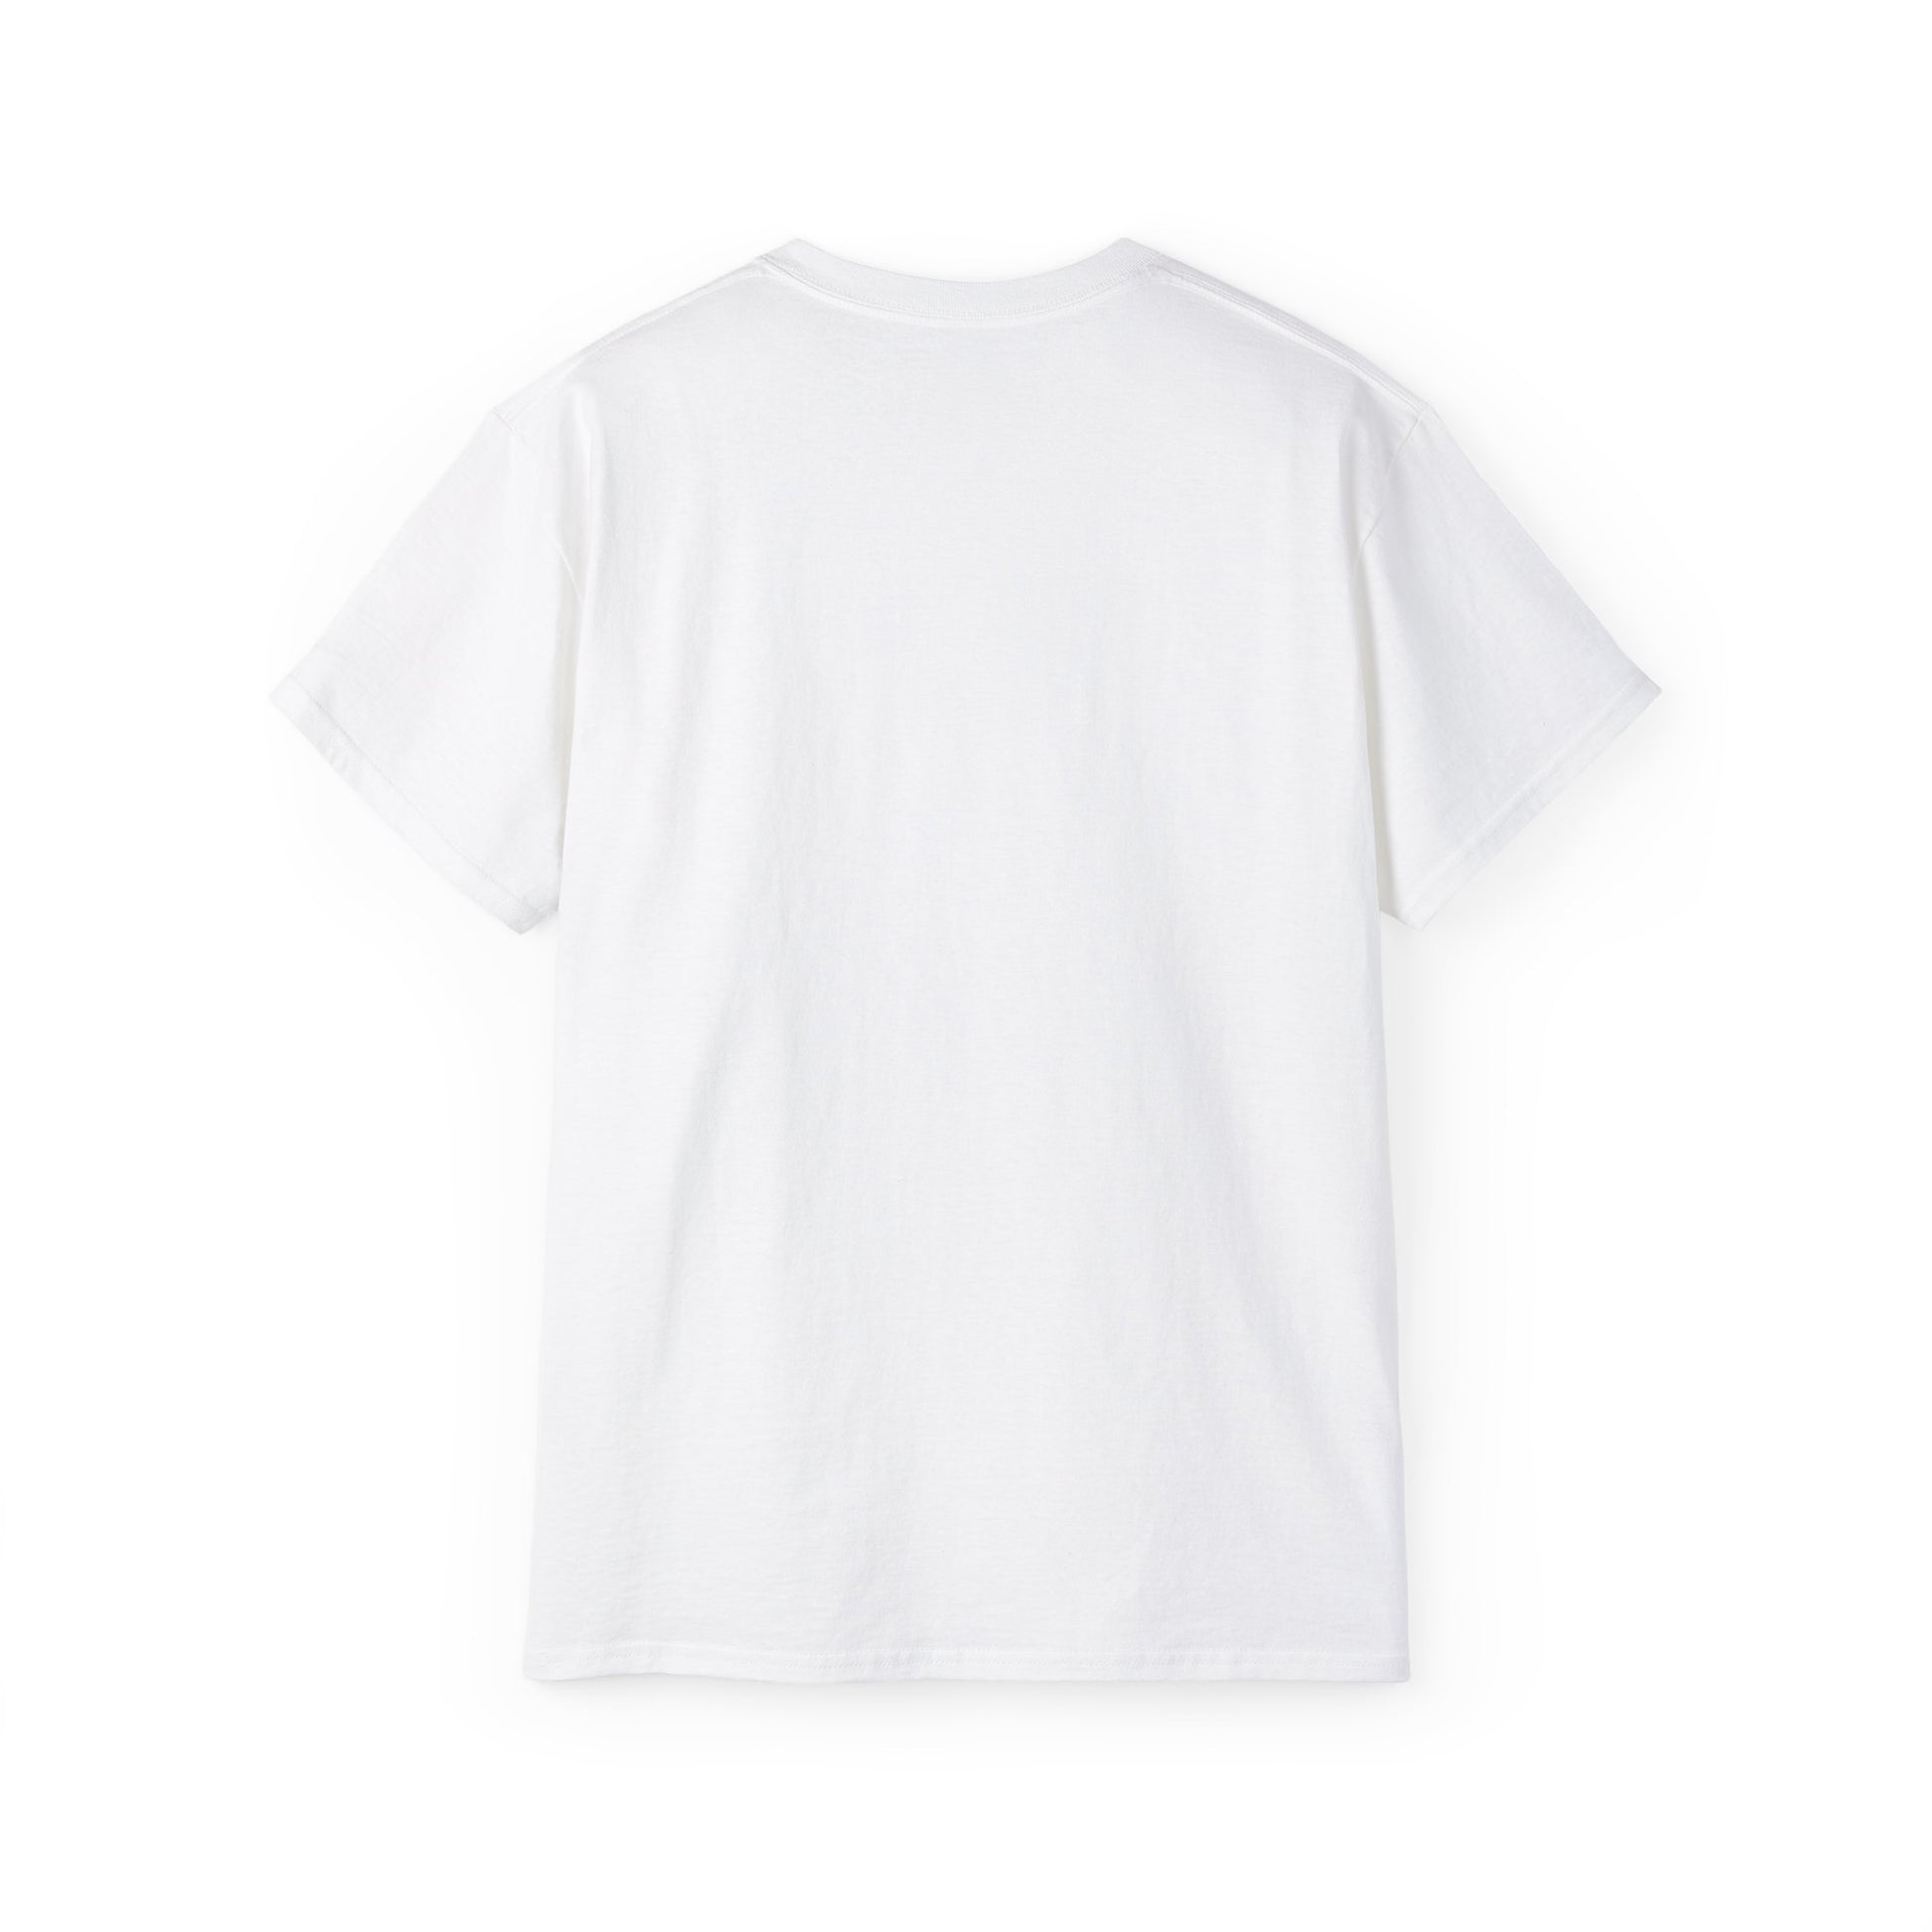 a white t - shirt on a white background